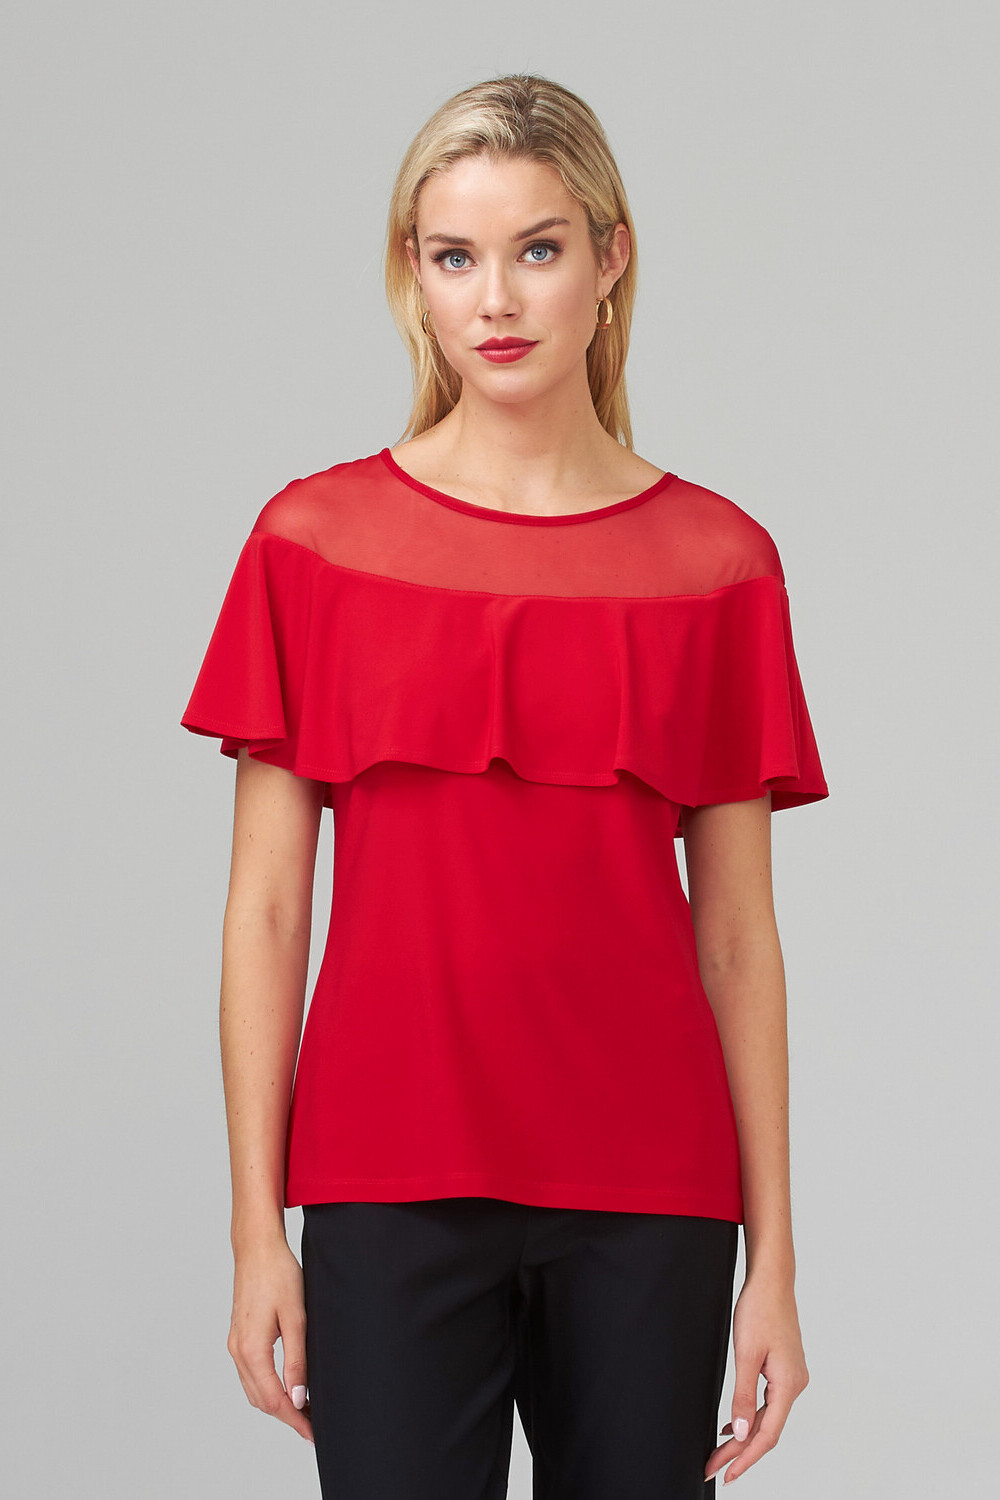 Joseph Ribkoff Tee-shirt Style 202113. Rouge A Levres 173